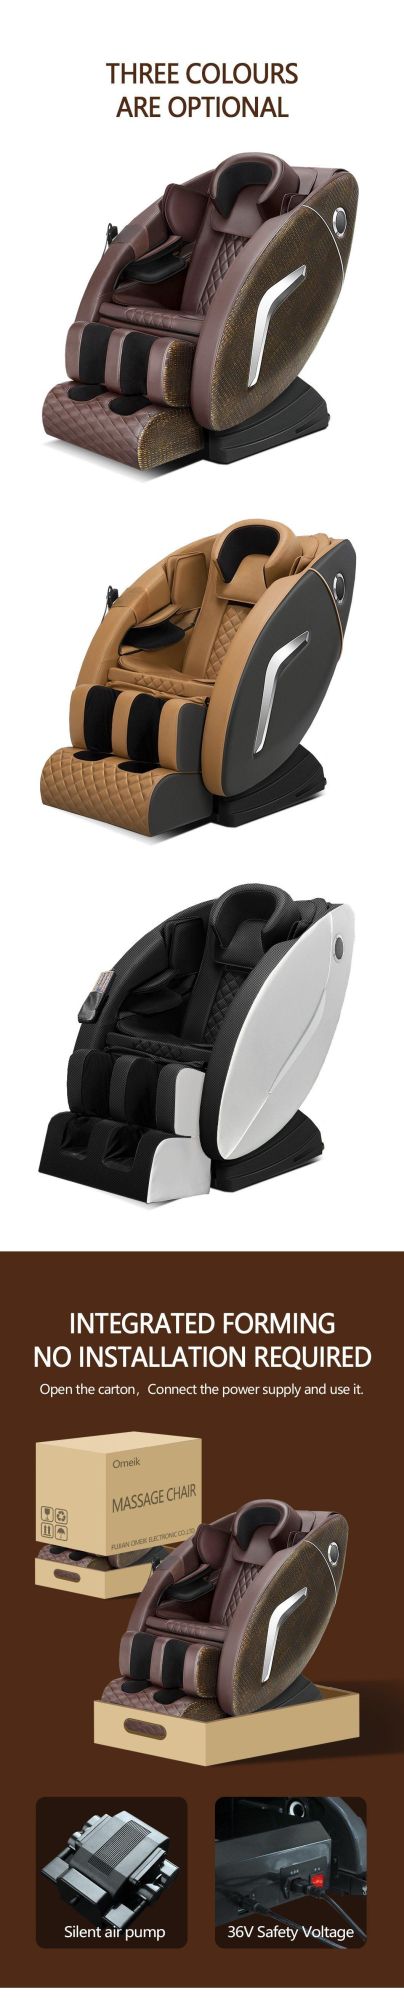 New Style Cheap Factory Selling Electric Full Body Airbag 3D Healthcare Music Massage Chair